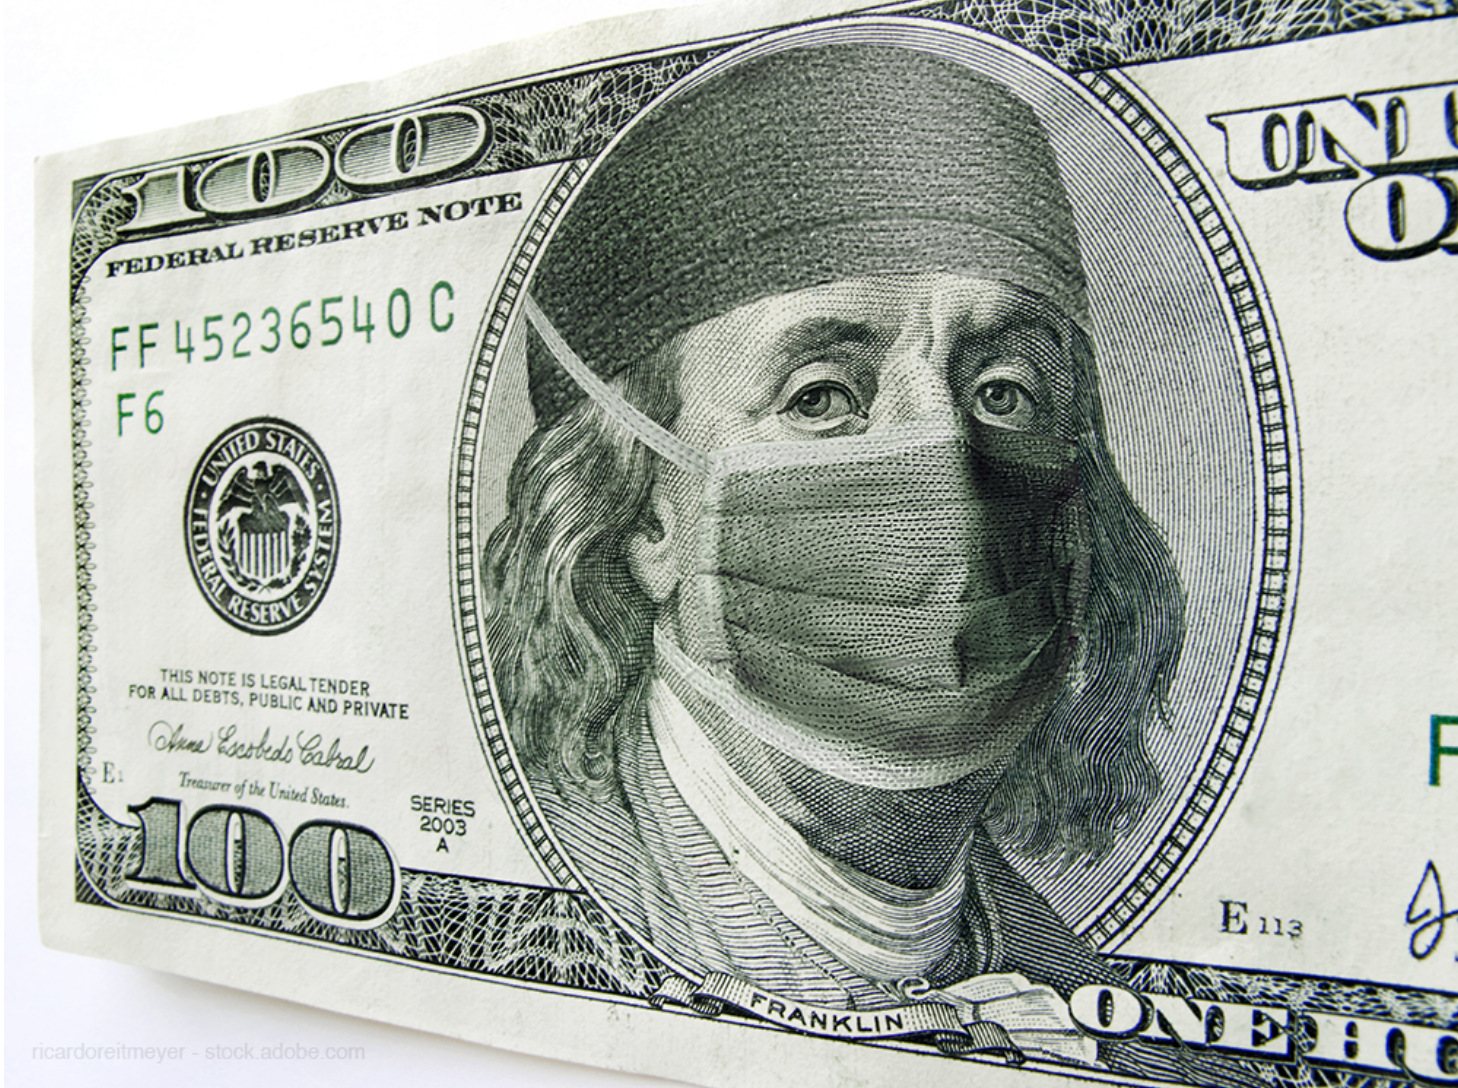 How much is your medical practice worth?